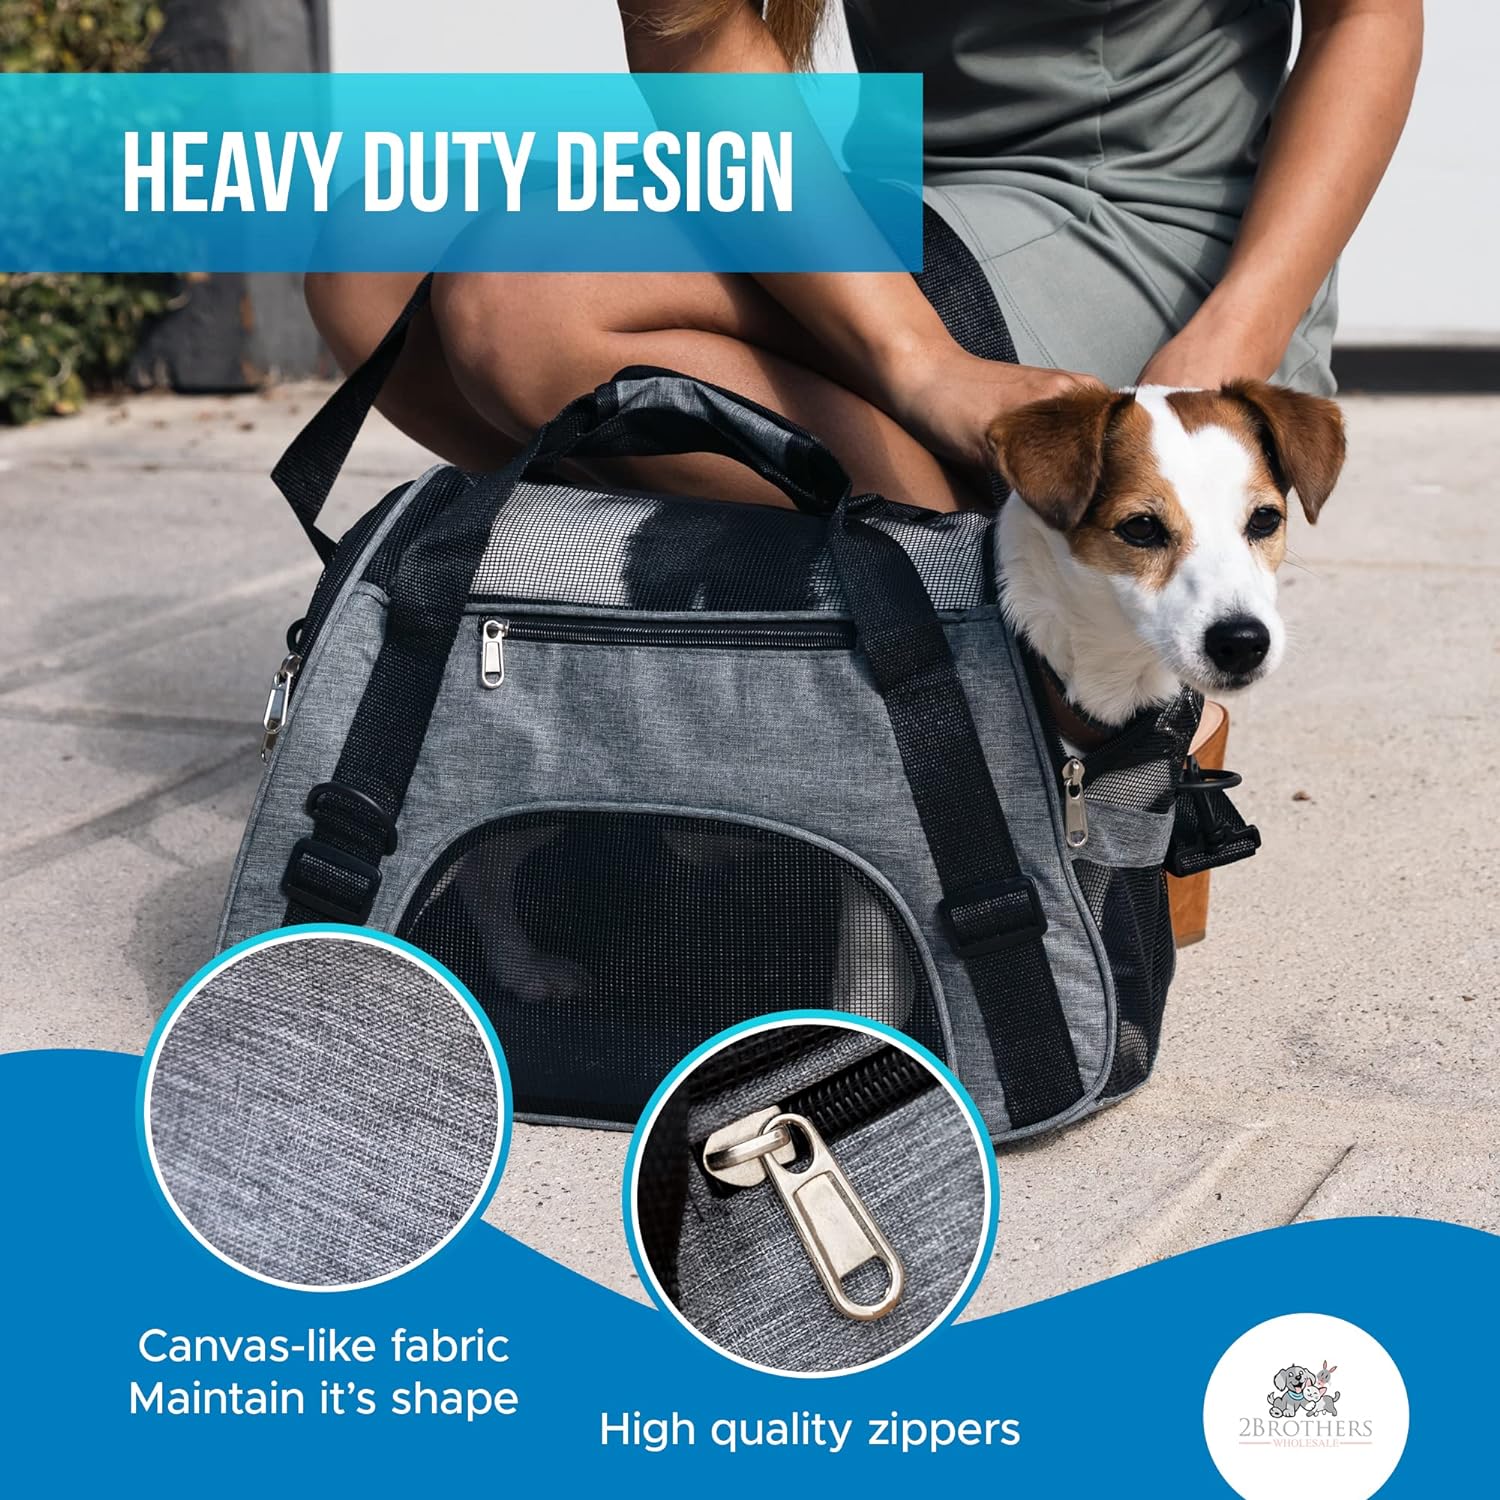 Collapsible Pet Carrier Soft